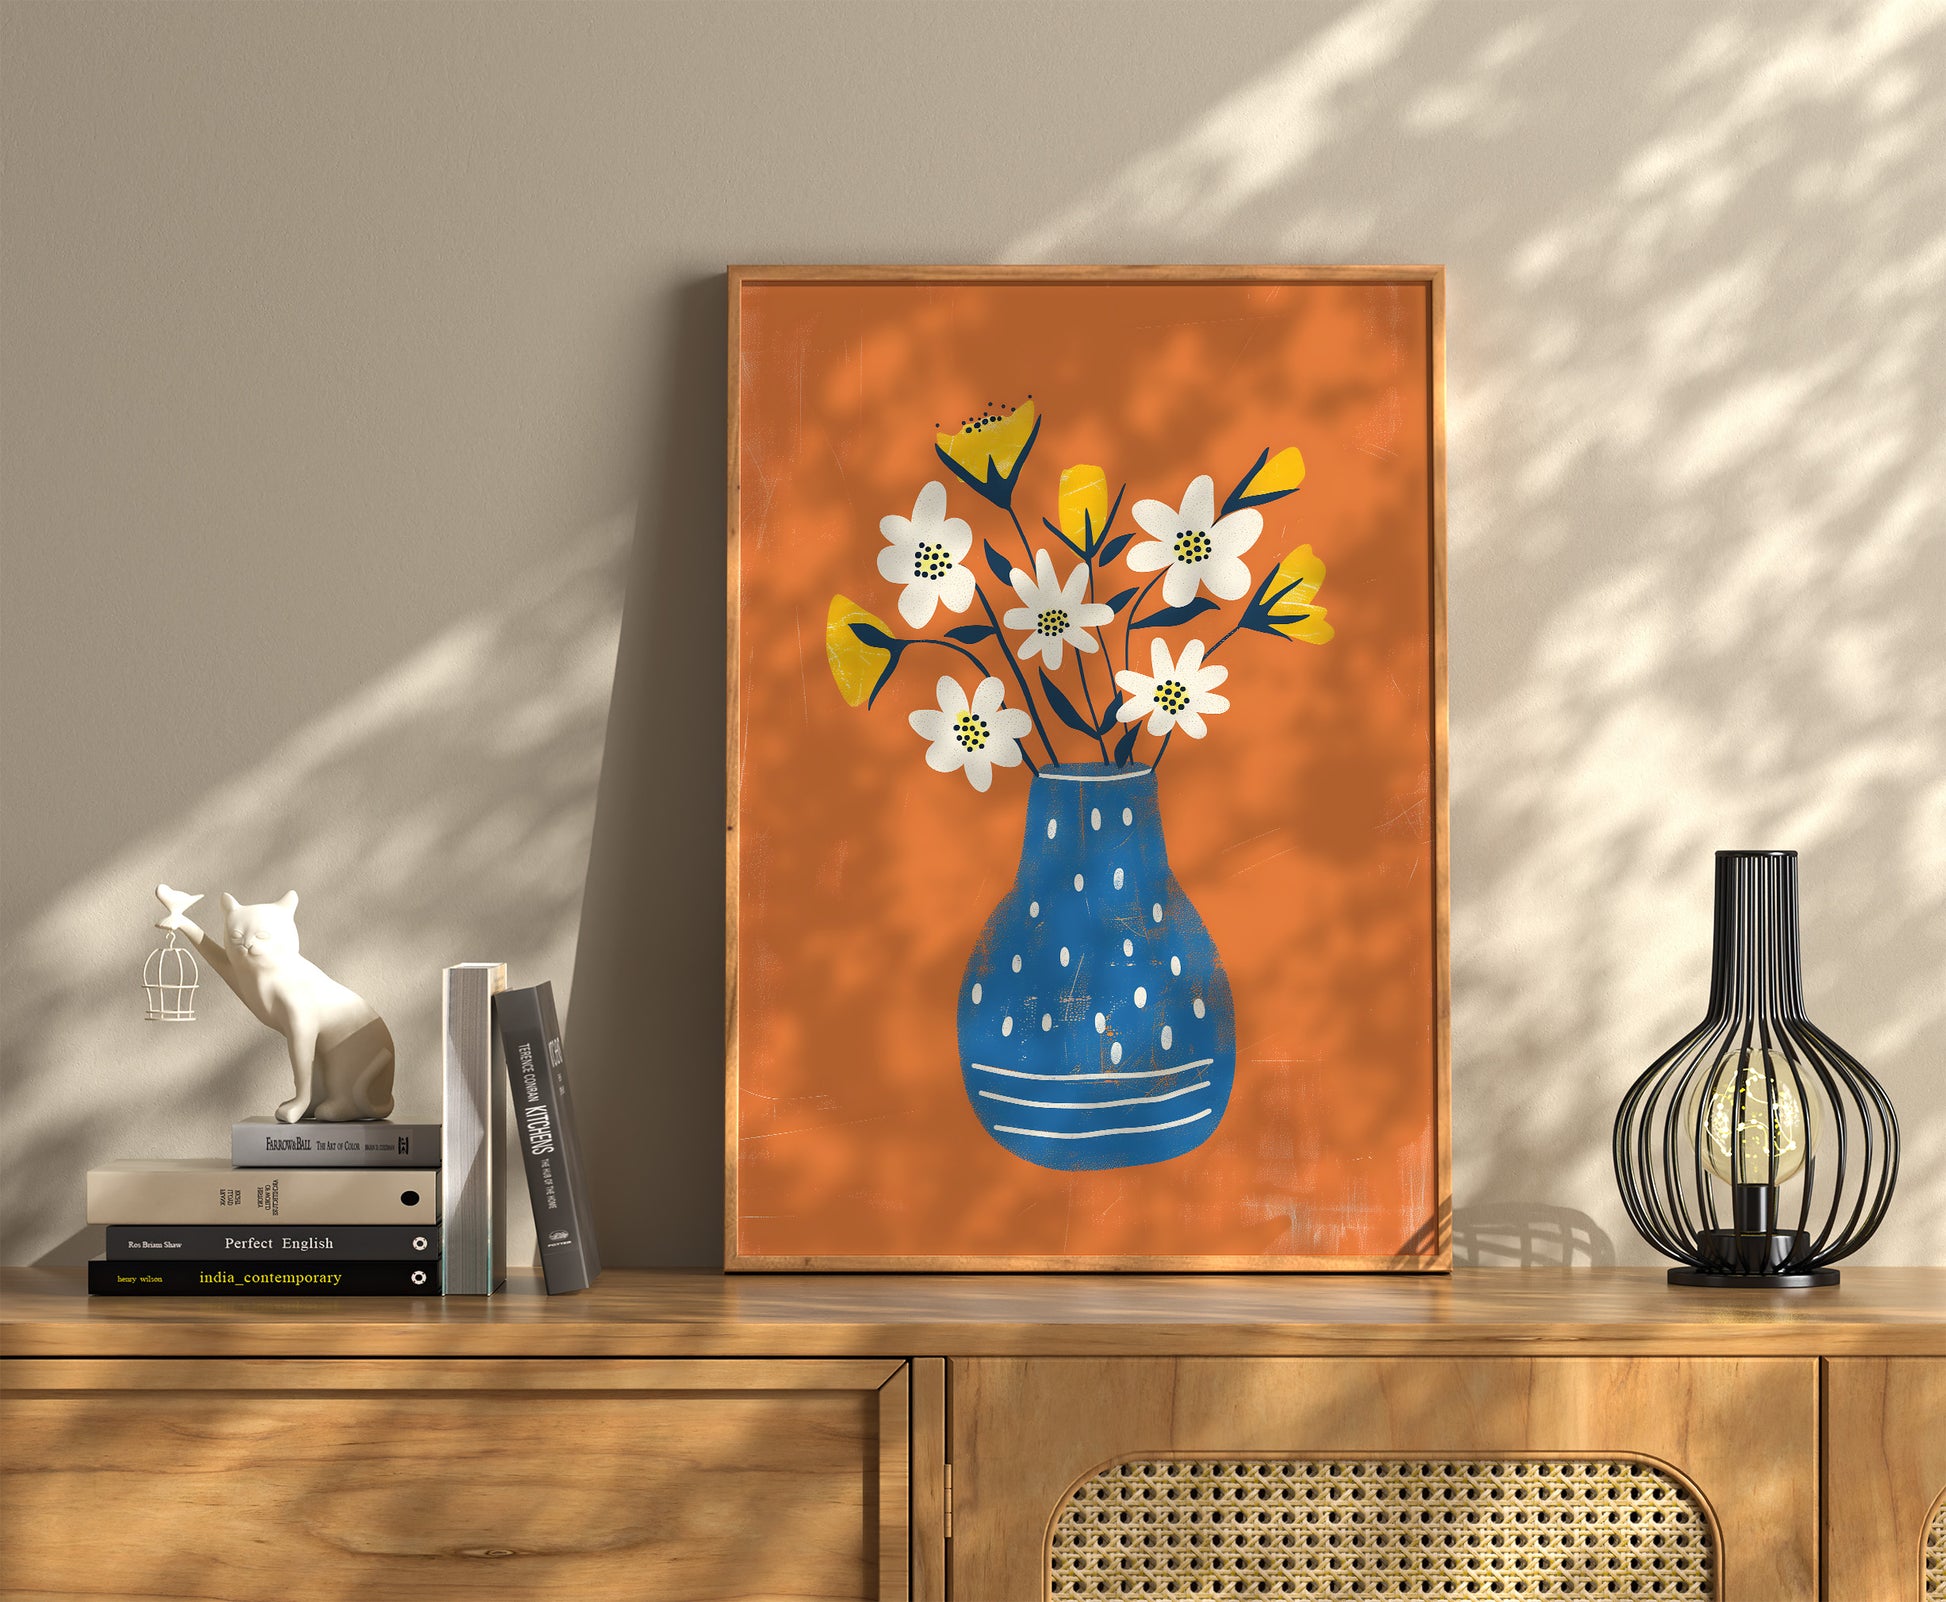 A framed illustration of flowers in a blue vase on a wooden sideboard with decor items.